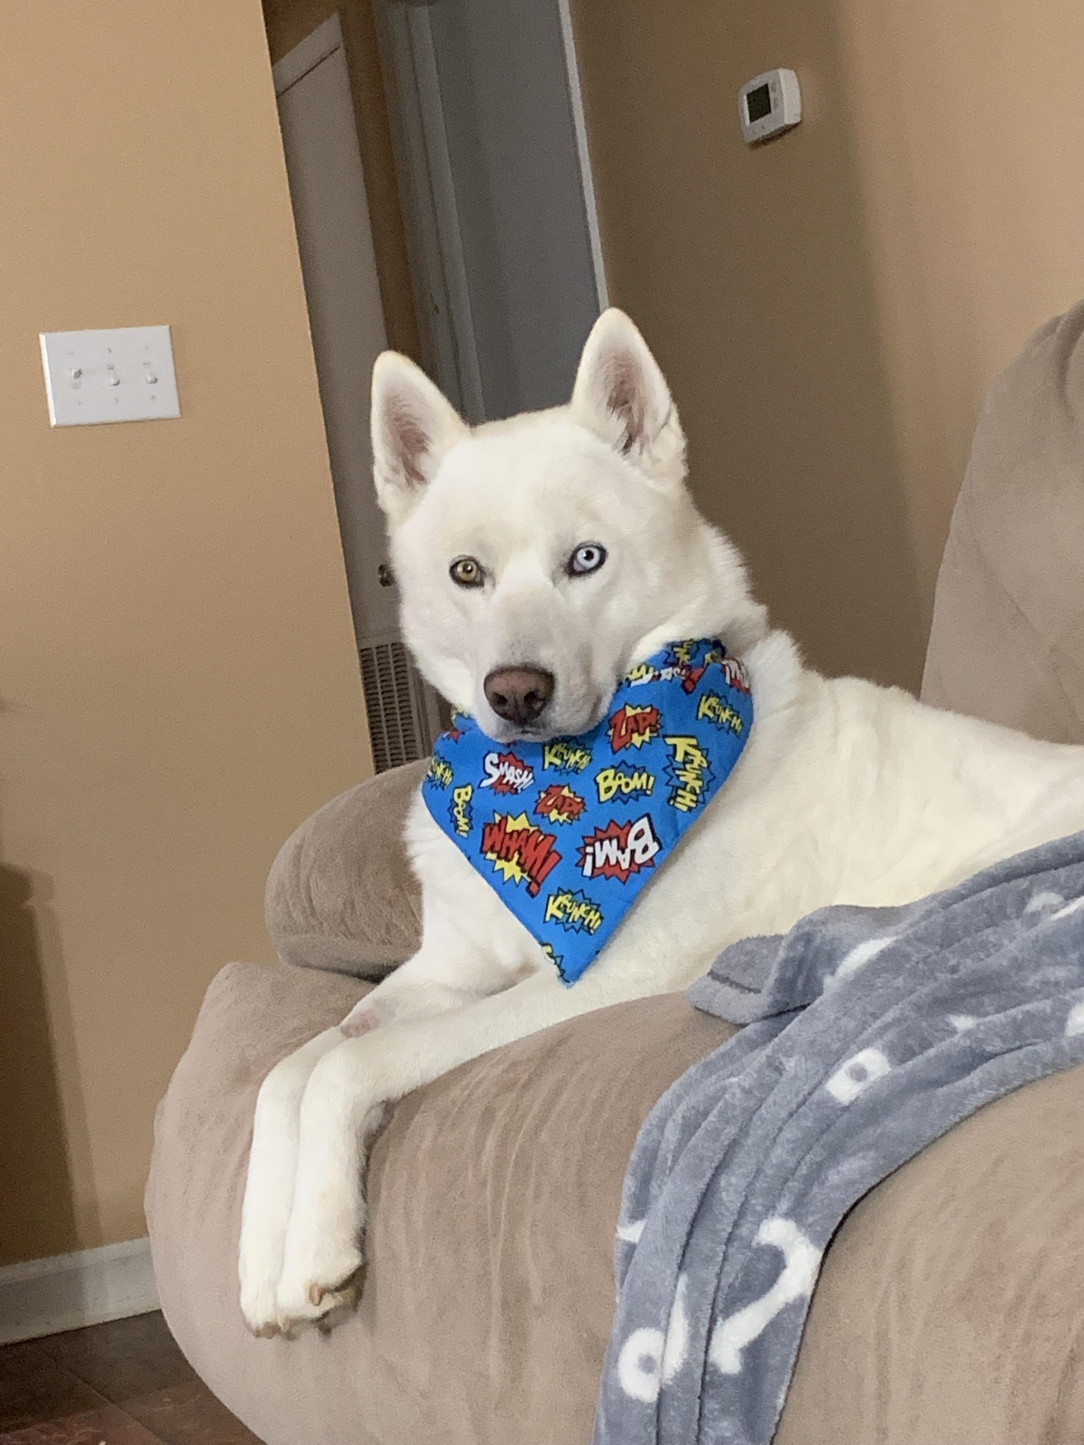 Apollo! The husky who just got a new bandanna. He is a prince